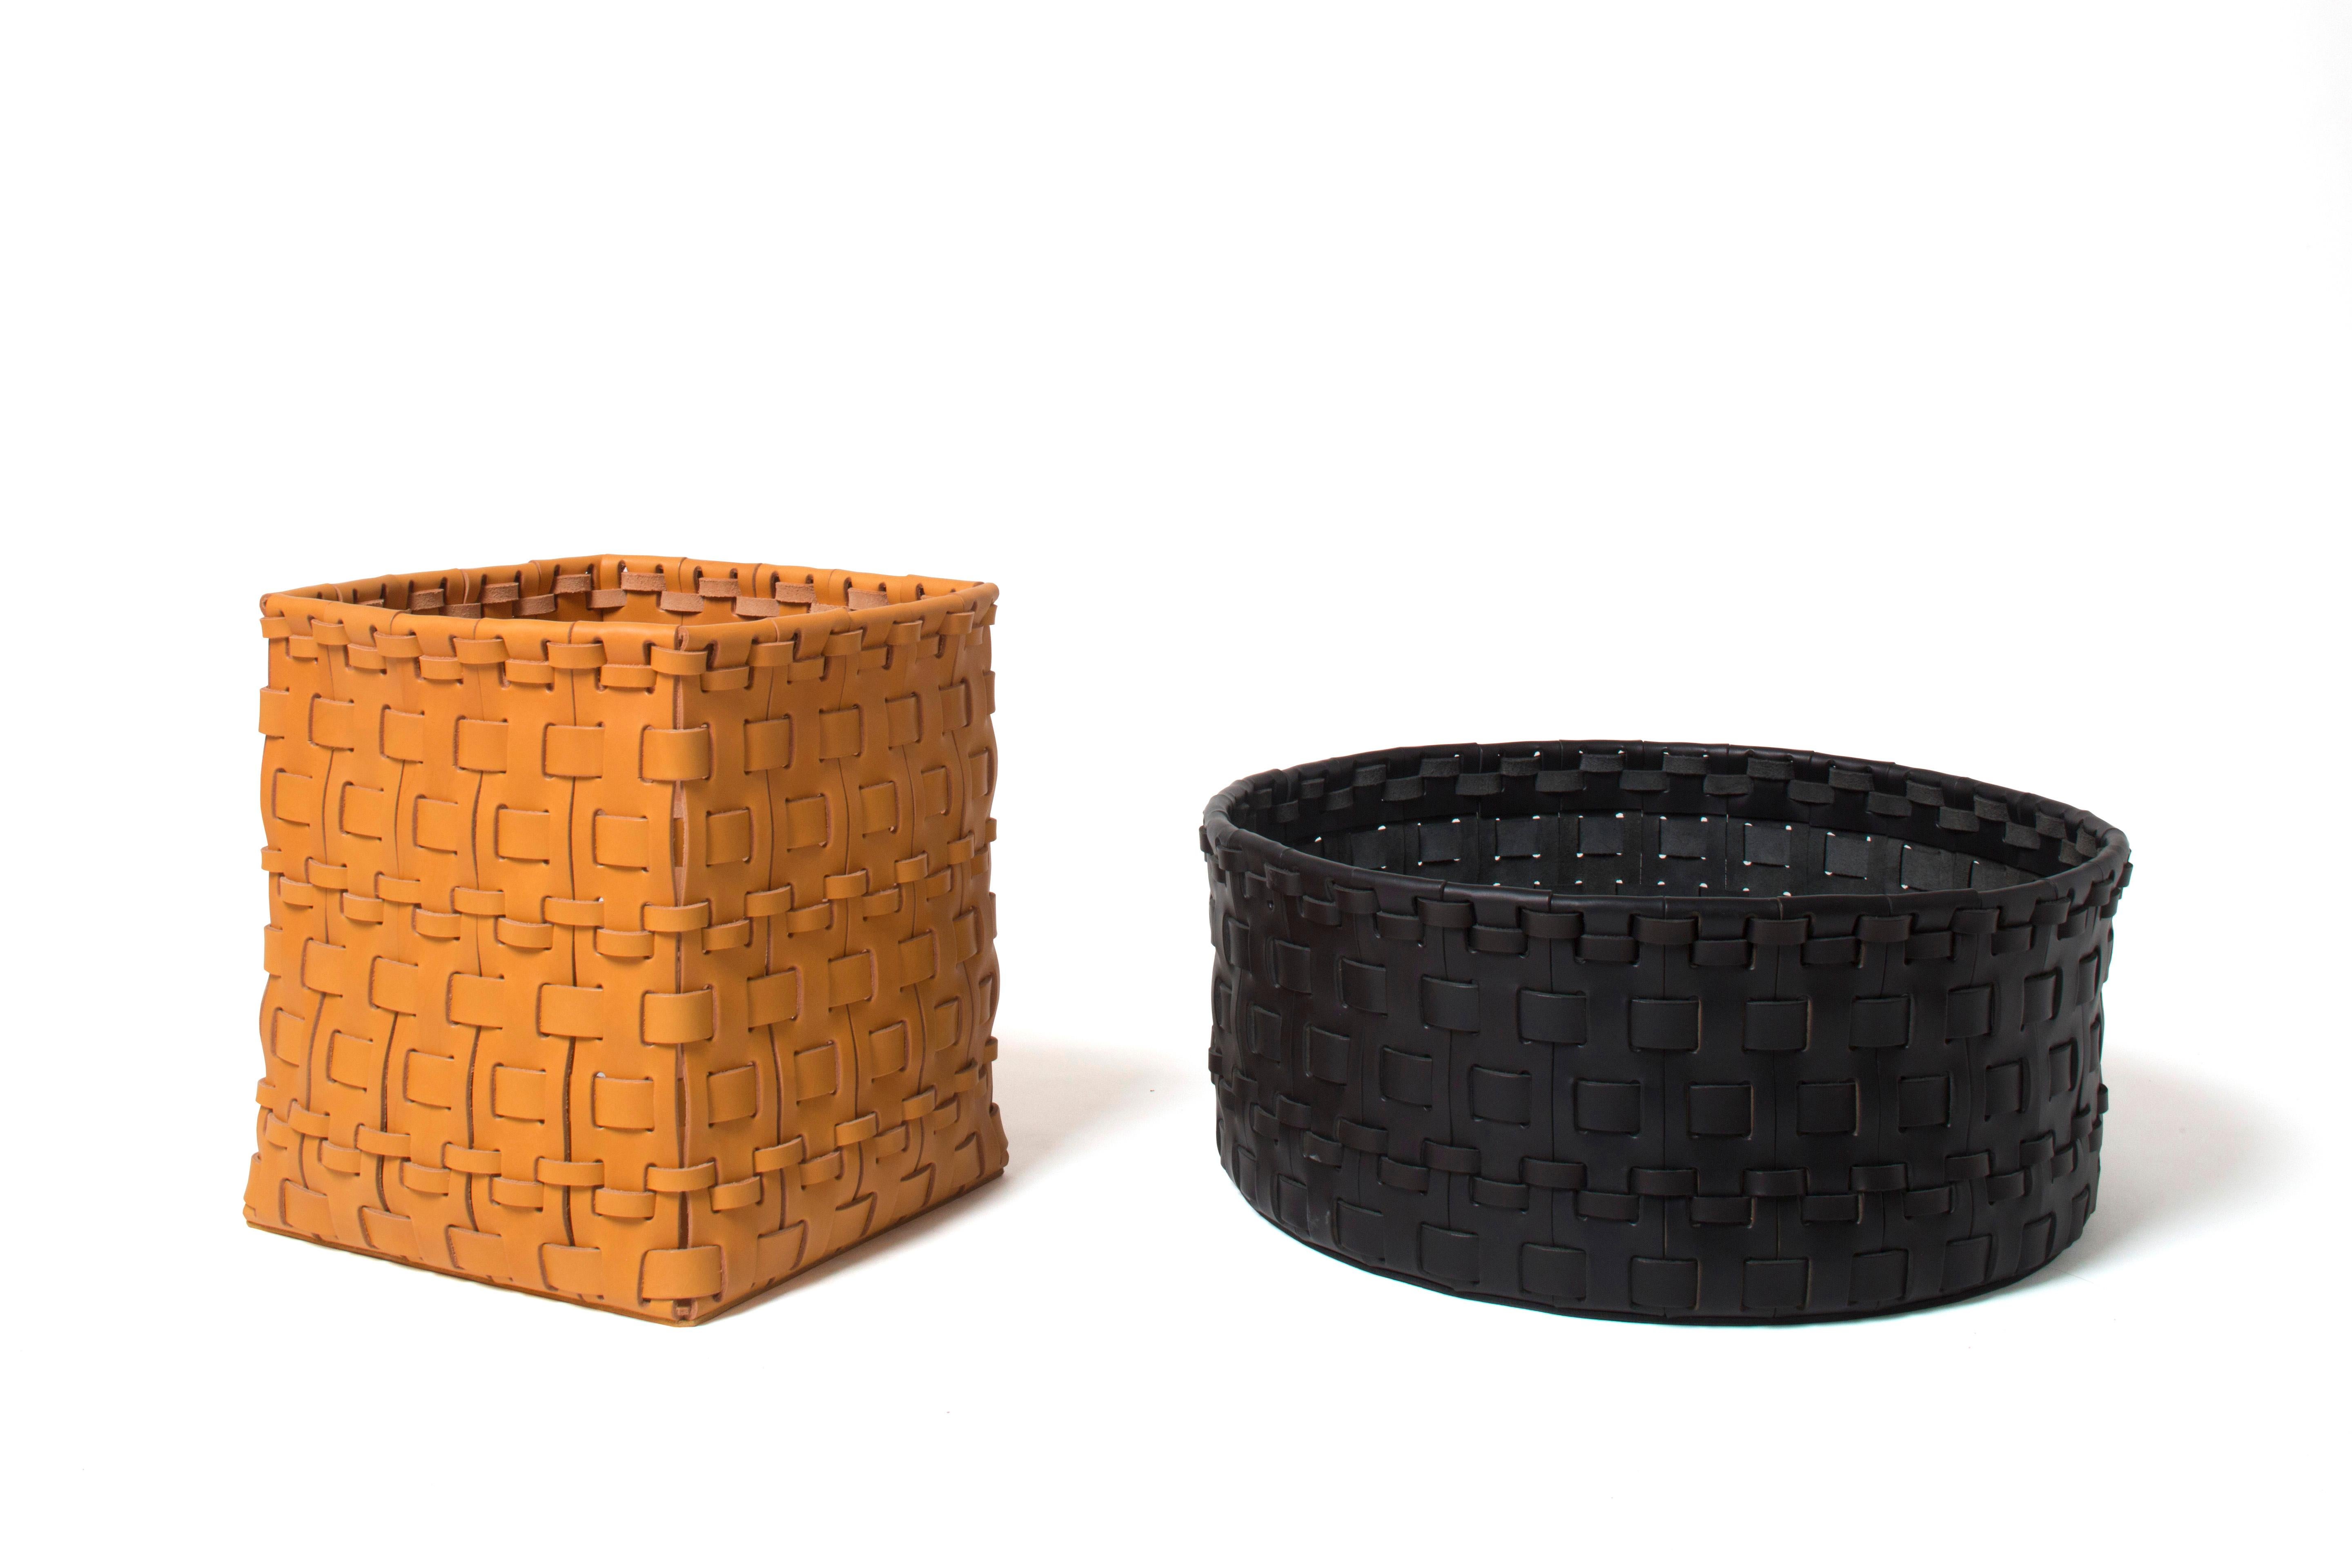 
Baskets made using a weaving technique. Strips and bands of leather follow each other and bind together to shape the object. 
Available in the round (large and small), rectangular and square versions.
Available colours: orange, white, blue, grey,